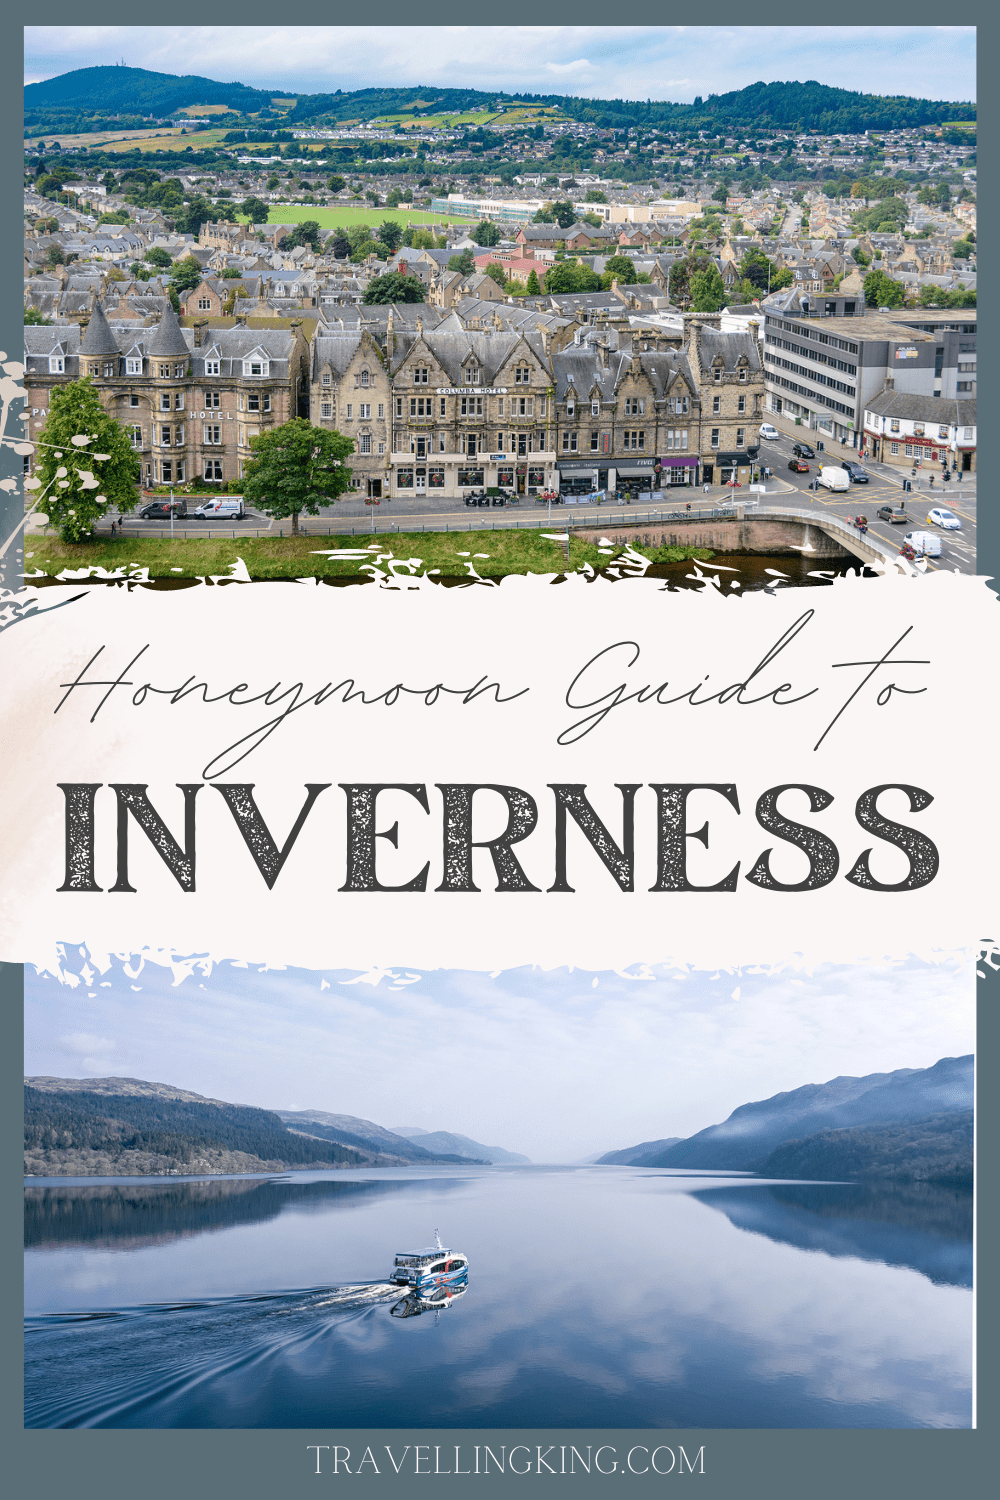 Honeymoon Guide to Inverness